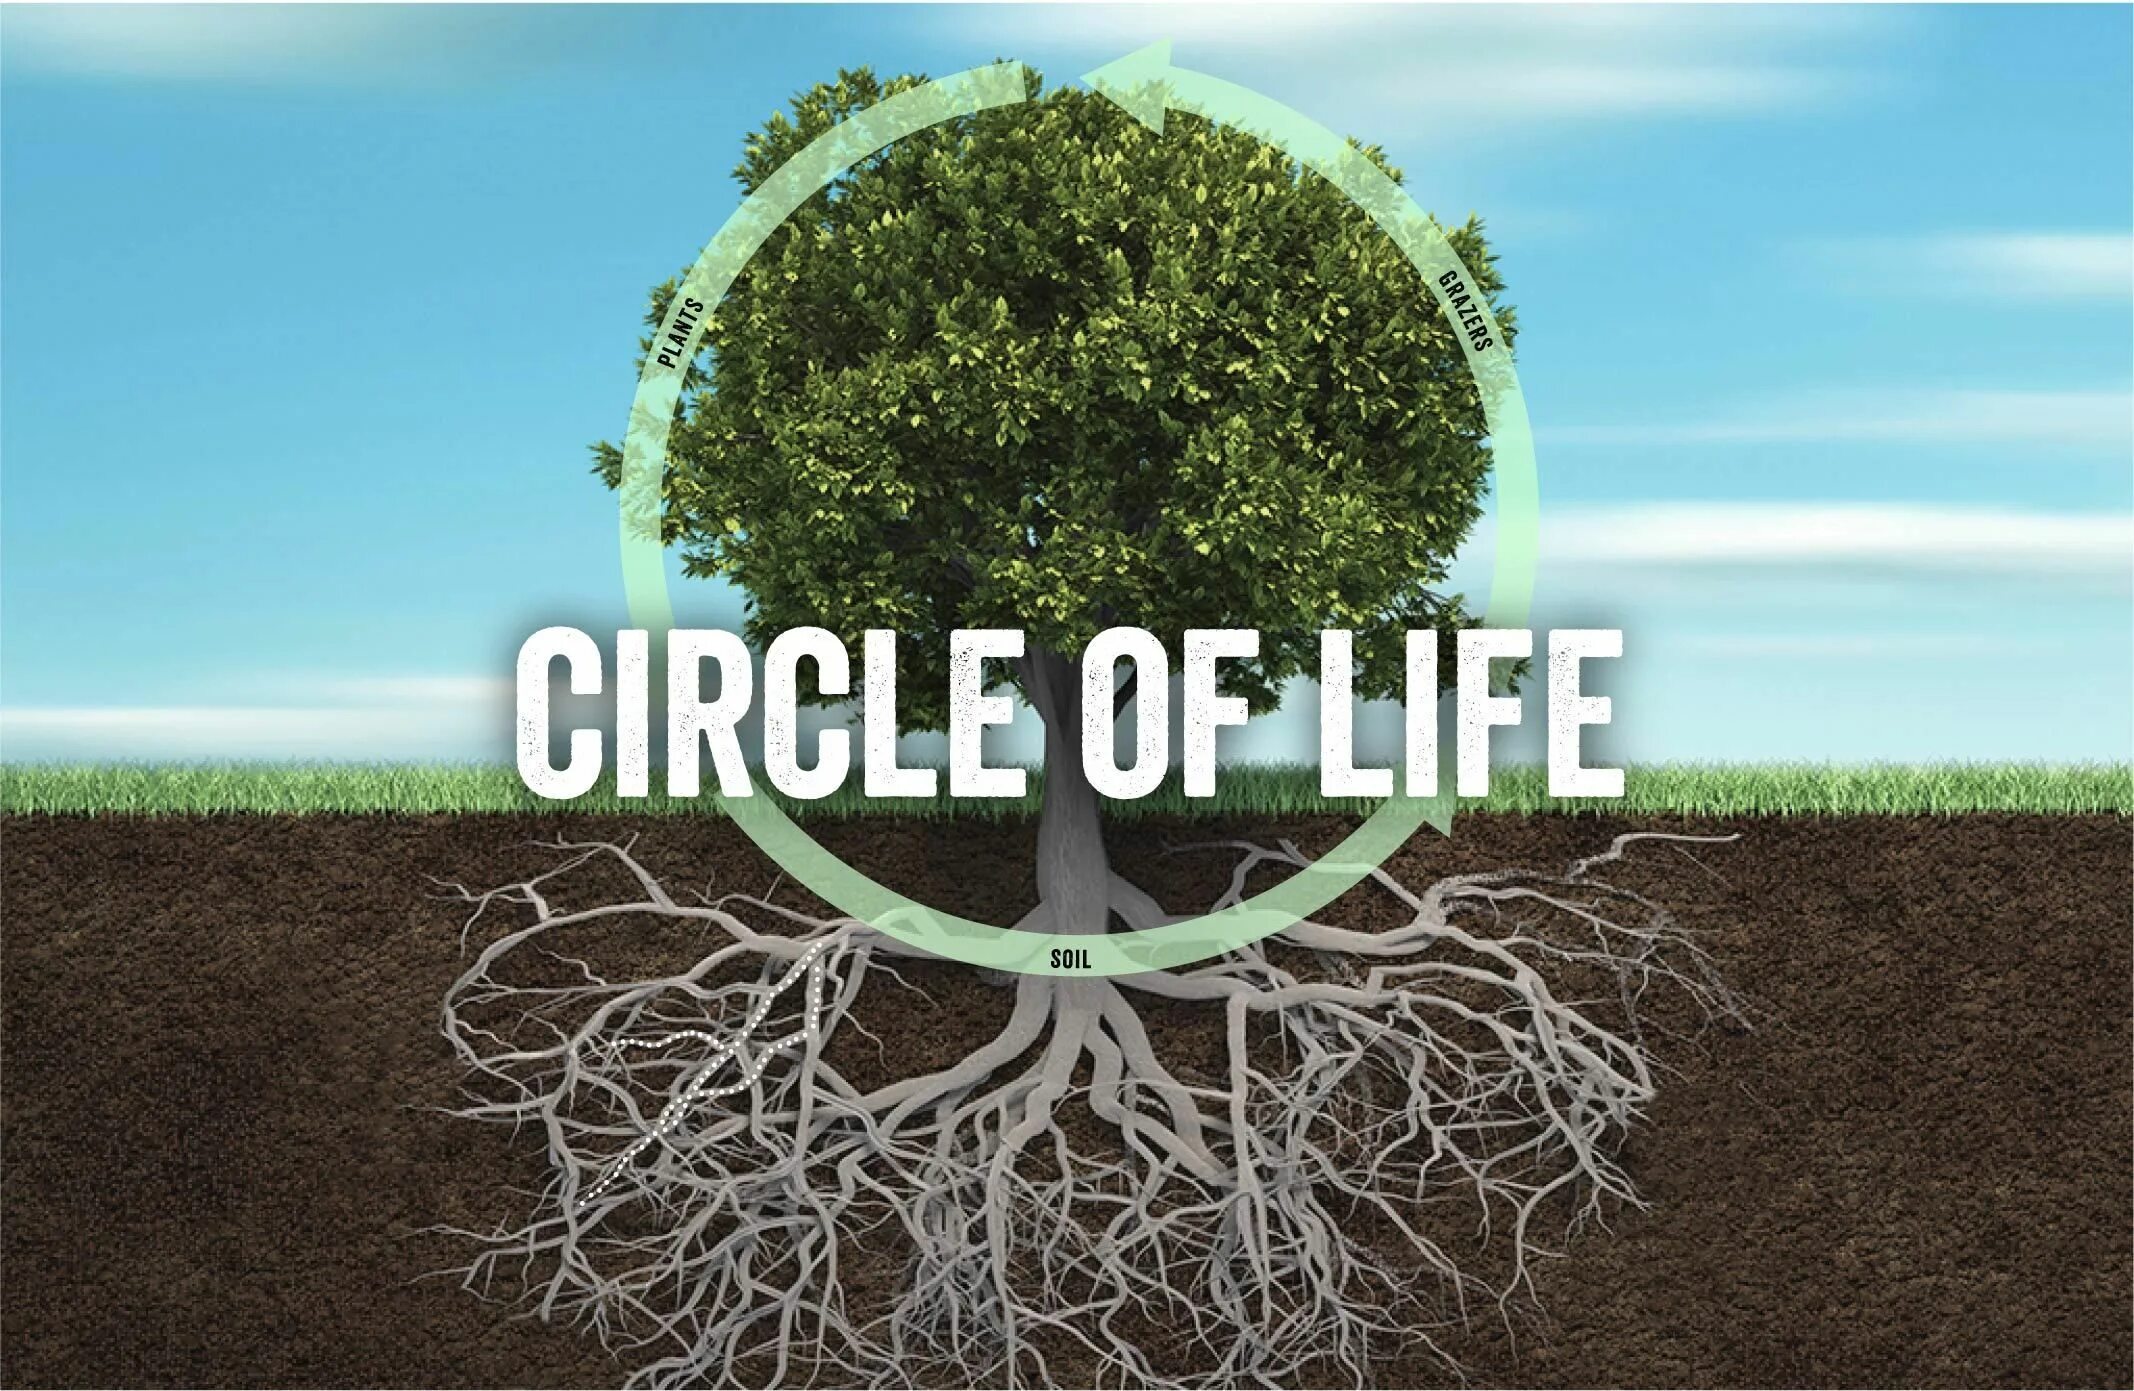 Life is circle. "The circle of Life" - круг жизни.. Grassland Carbon Cycle. Ecosystem Plants Soil. Tree circle Carbon.